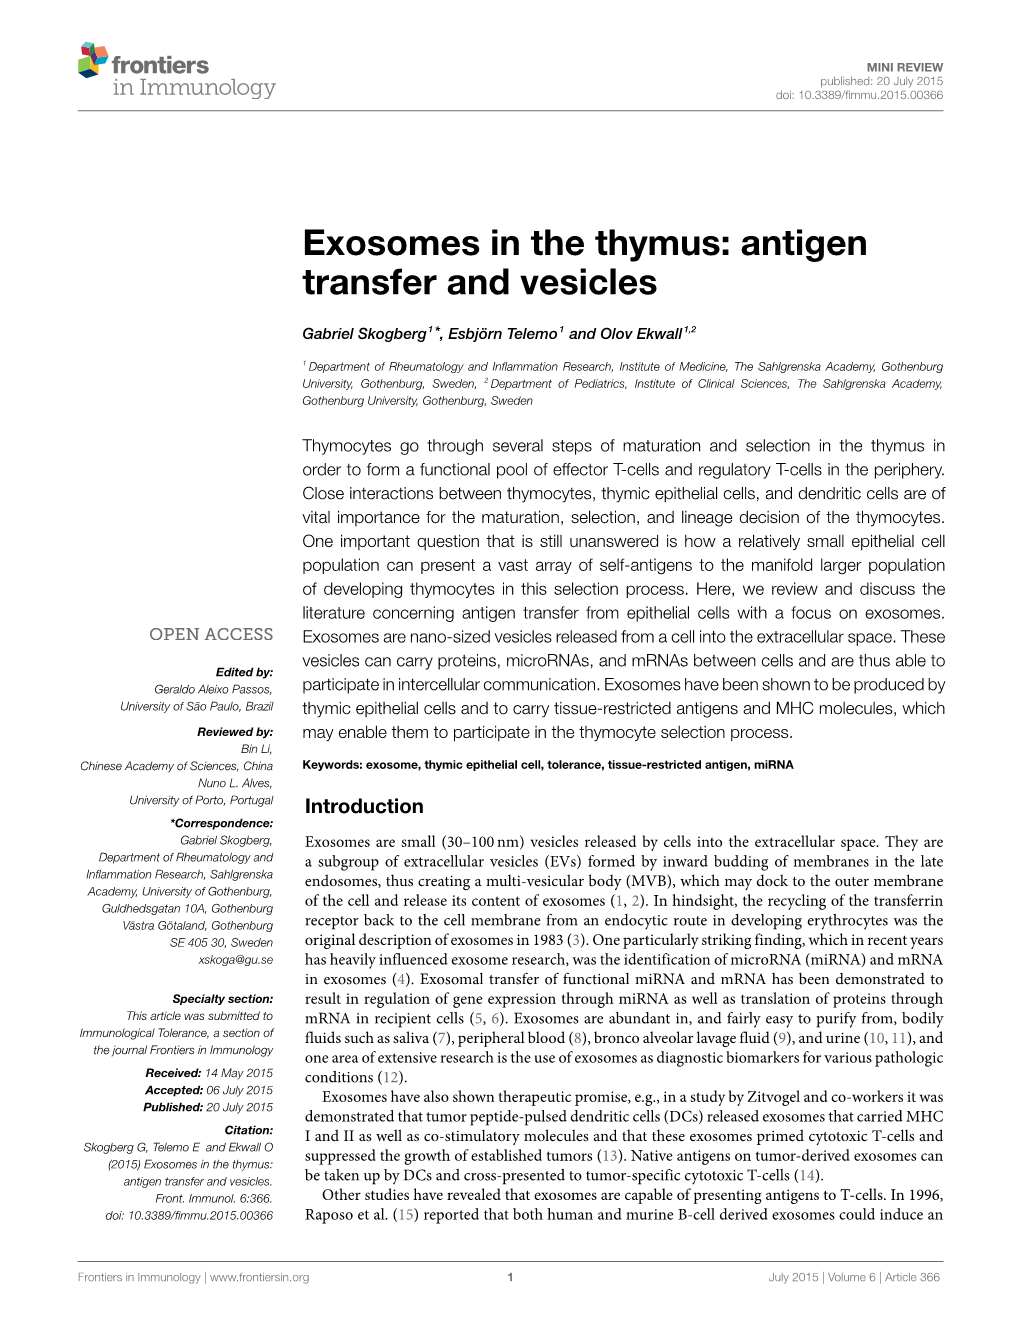 Exosomes in the Thymus: Antigen Transfer and Vesicles